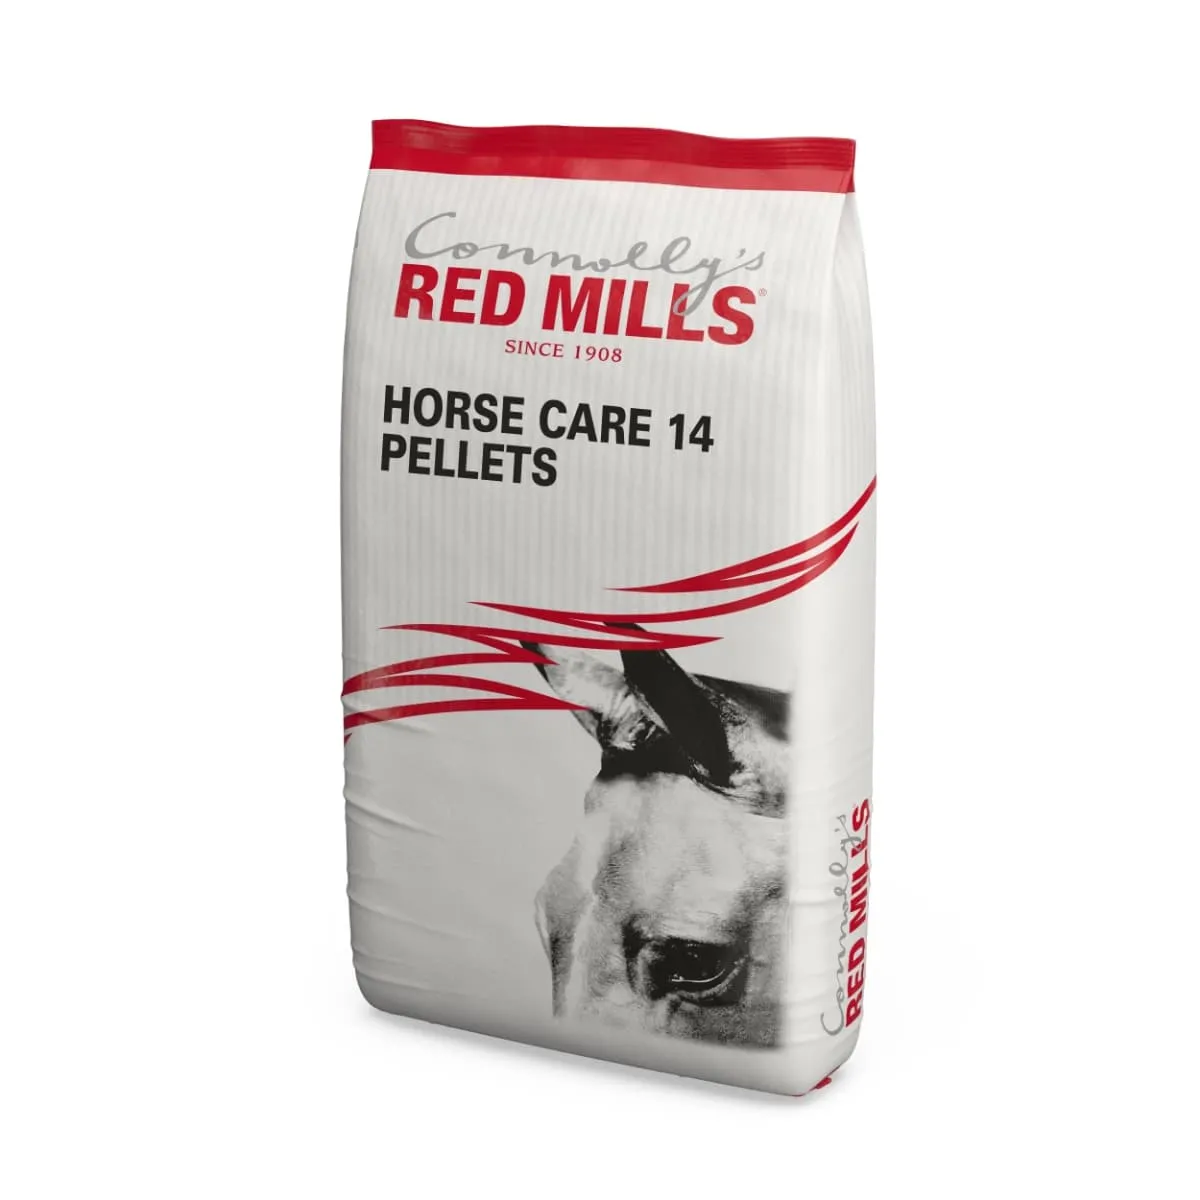 Connollys RED MILLS Horse Feed